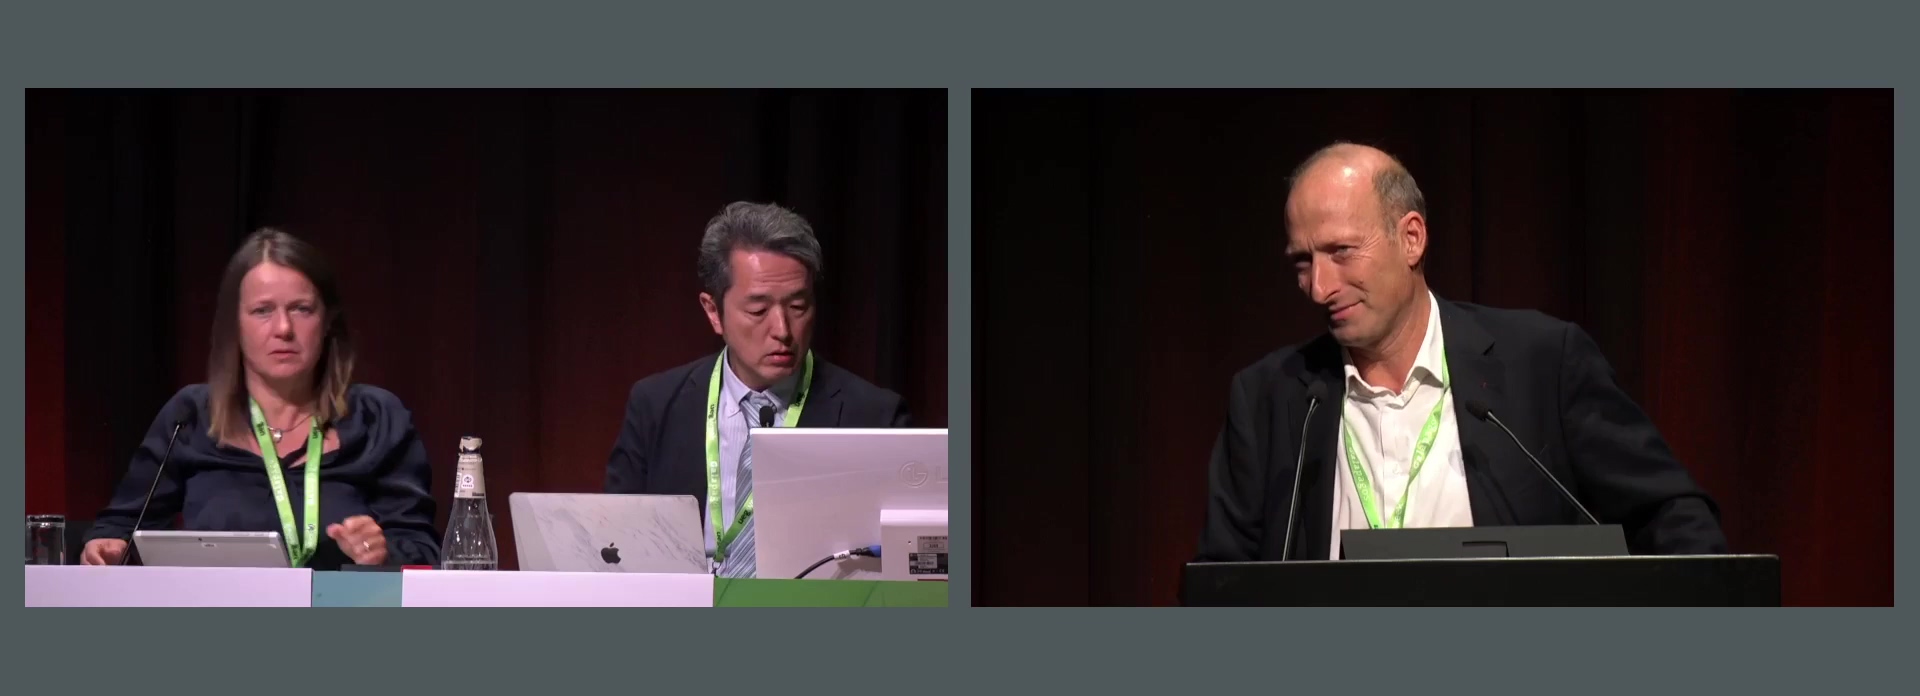 Panel discussion: Large lesions in the proximal colon